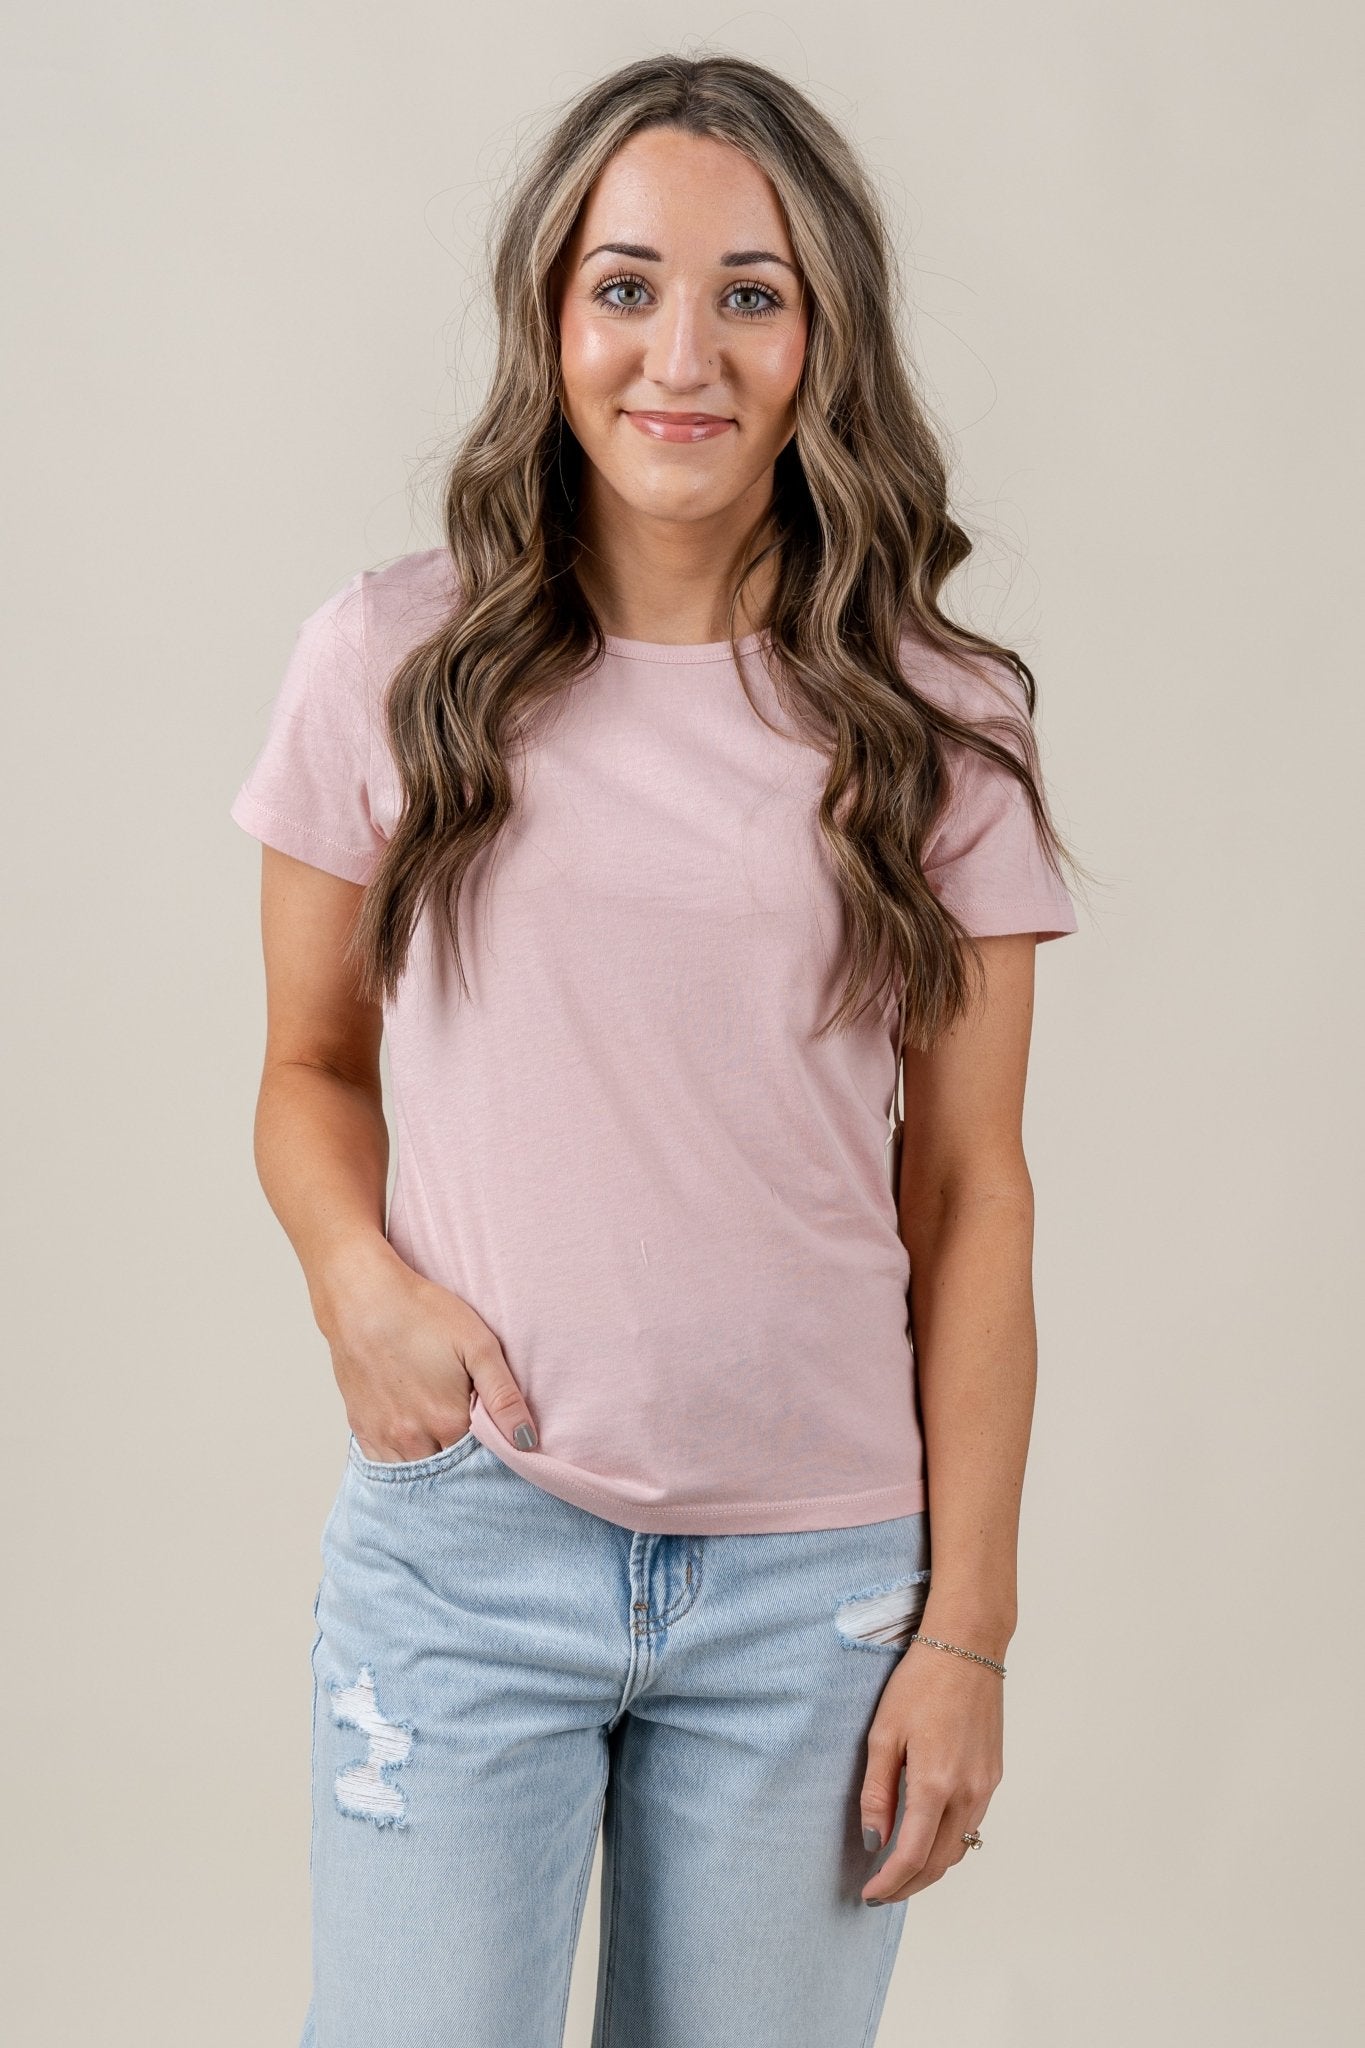 Z Supply classic short sleeve tee blush mood - Z Supply Top - Z Supply Apparel at Lush Fashion Lounge Trendy Boutique Oklahoma City